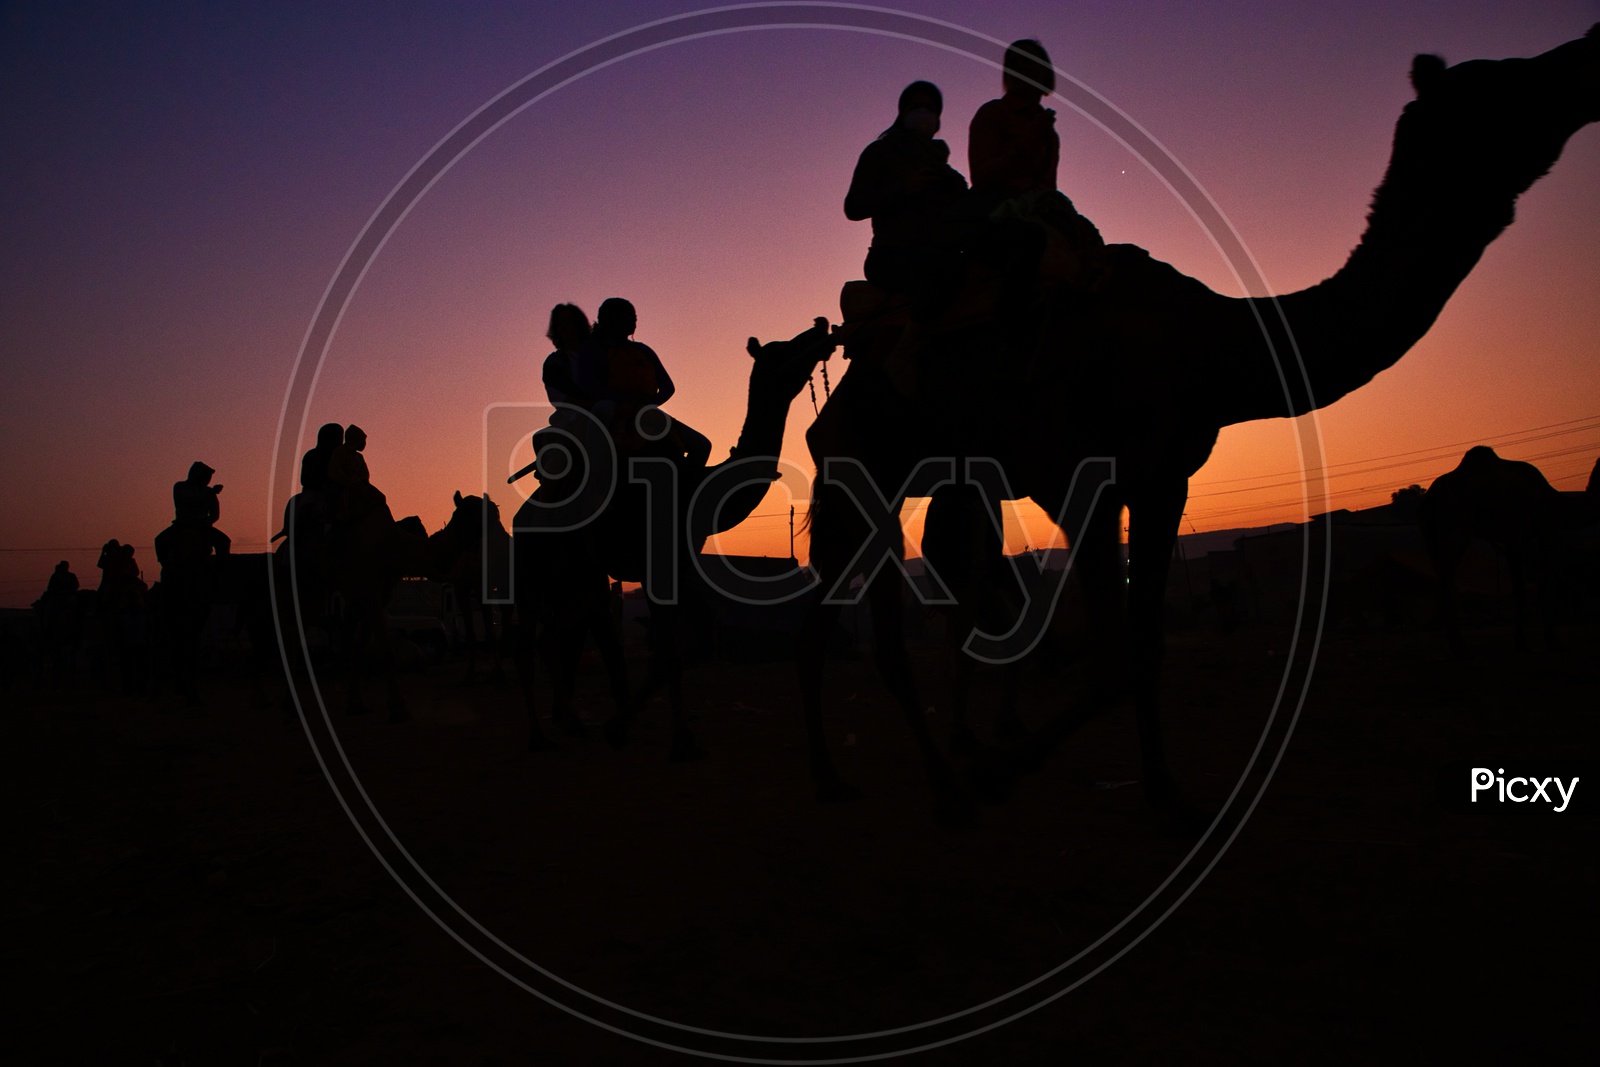 Silhouette of Camels